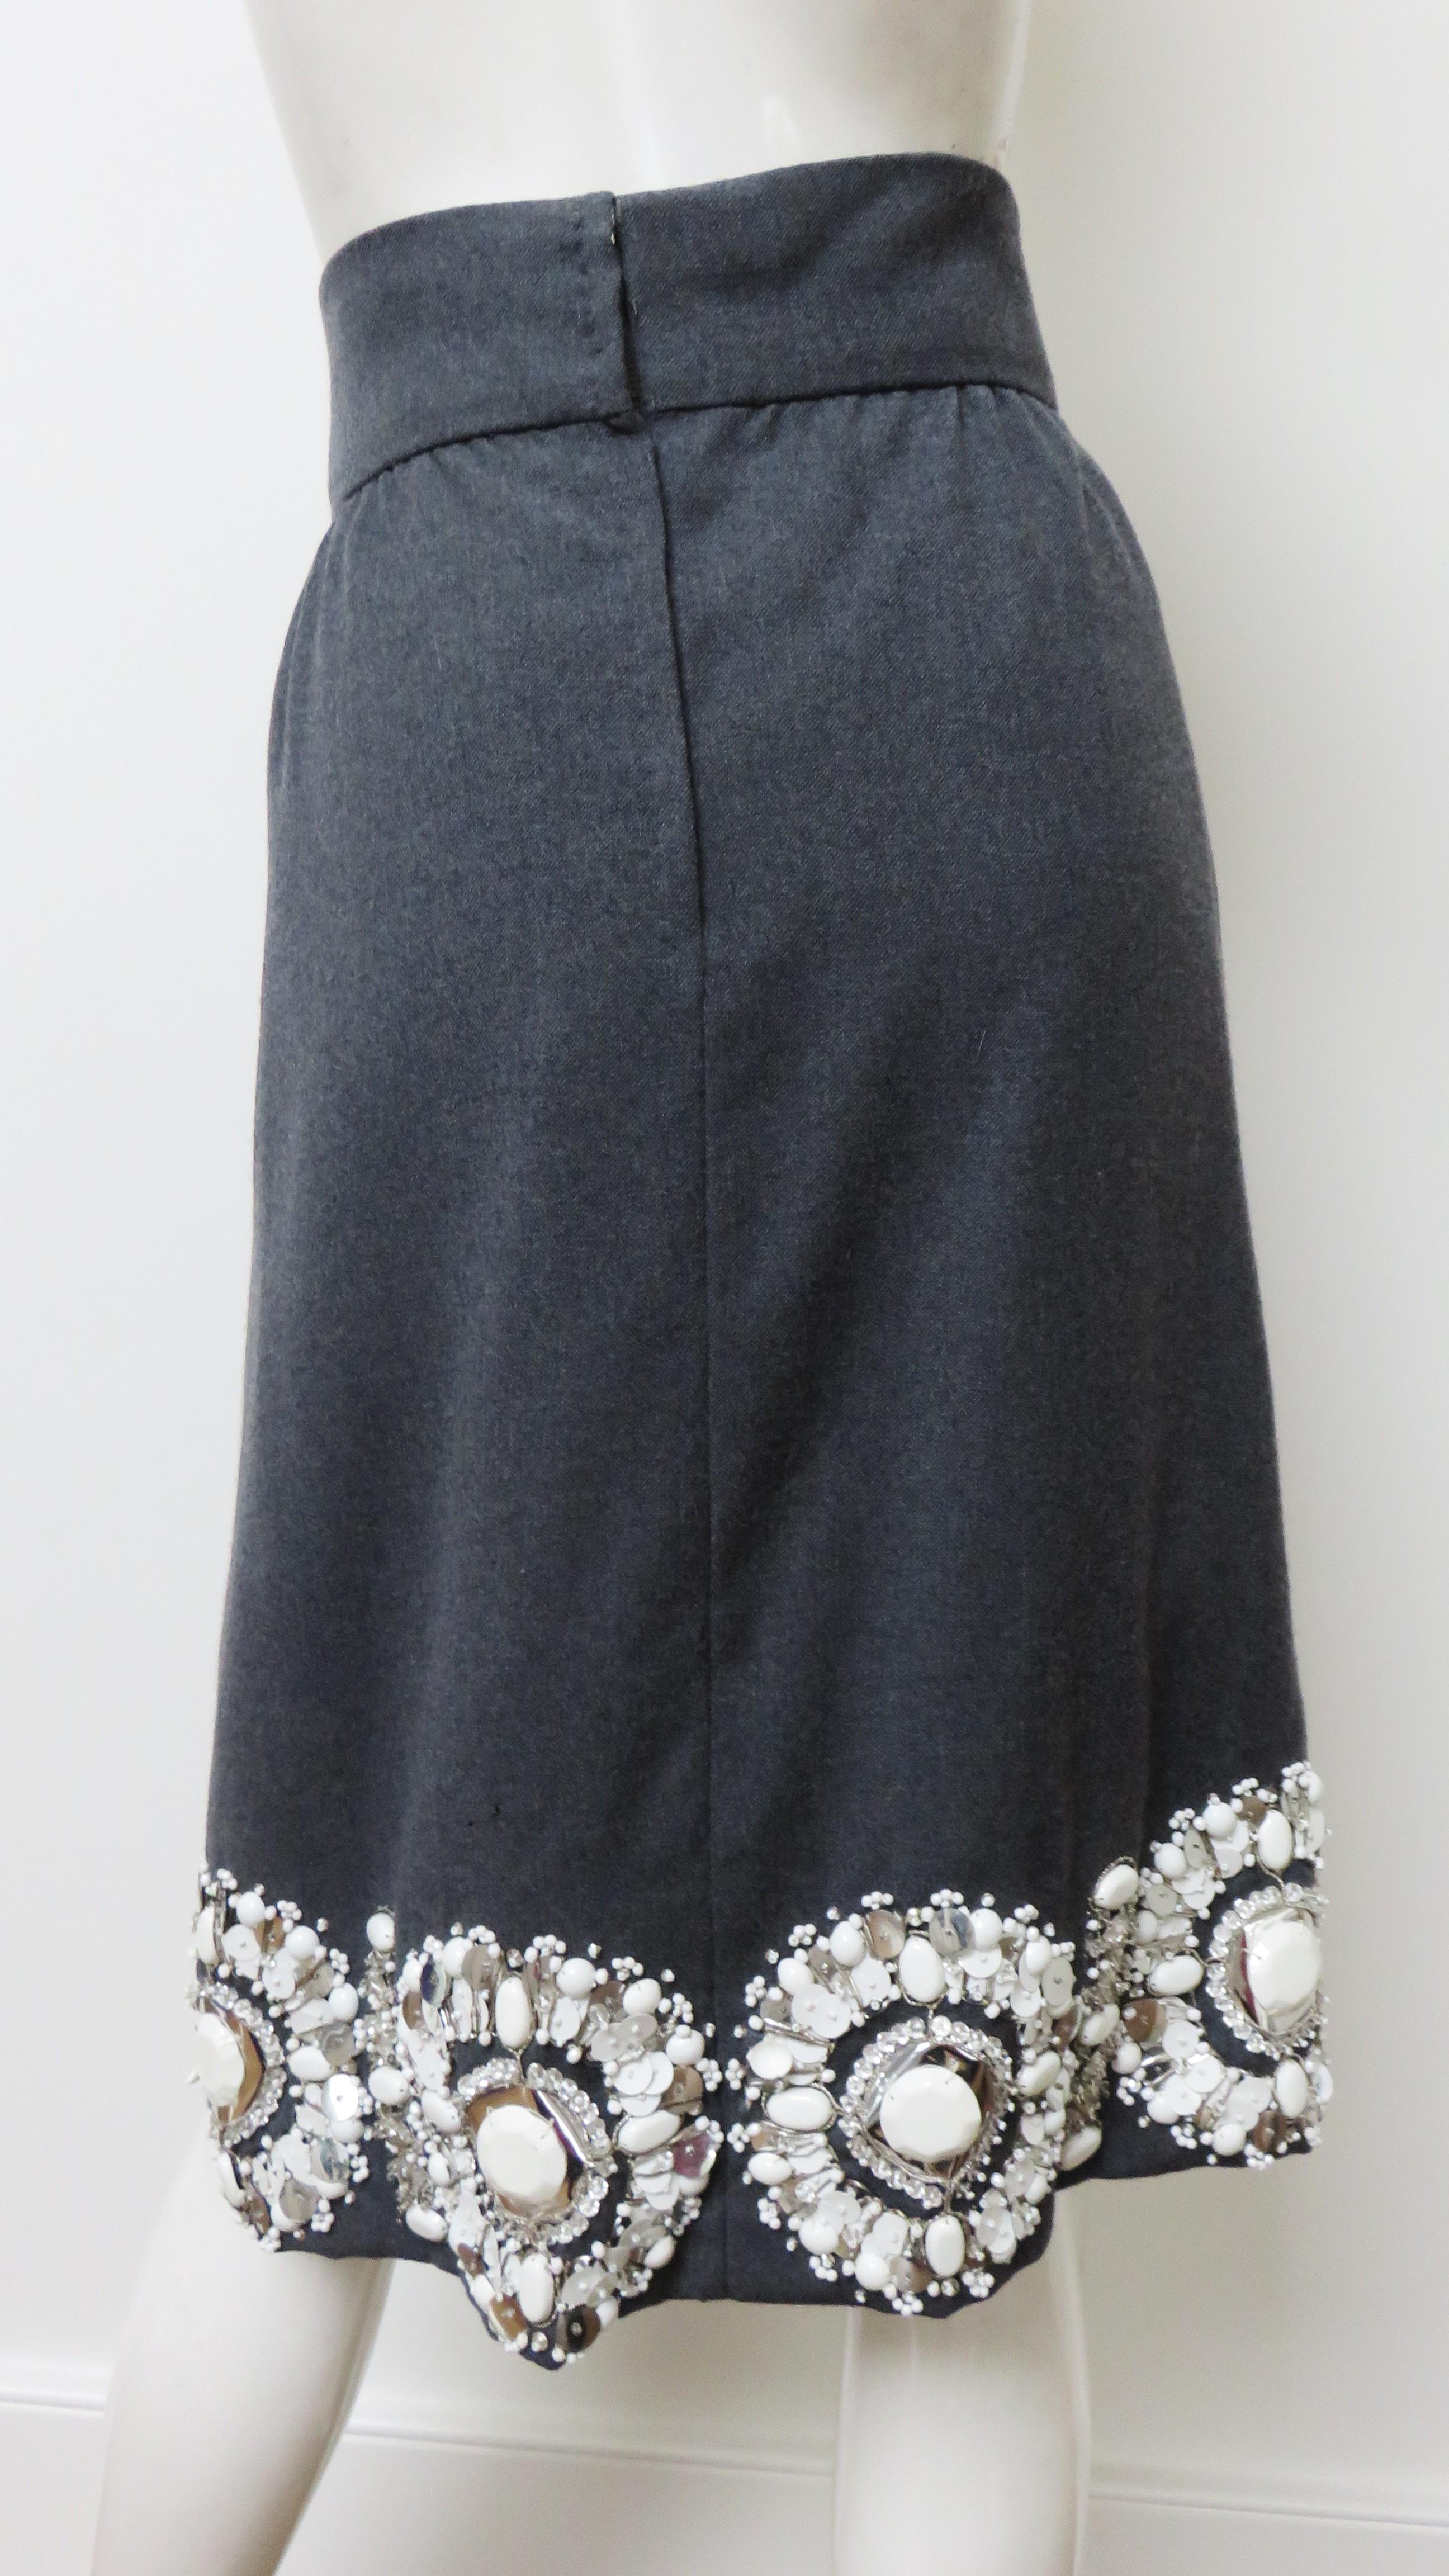 1960s Grey Skirt with Elaborate Bead Trim For Sale 4